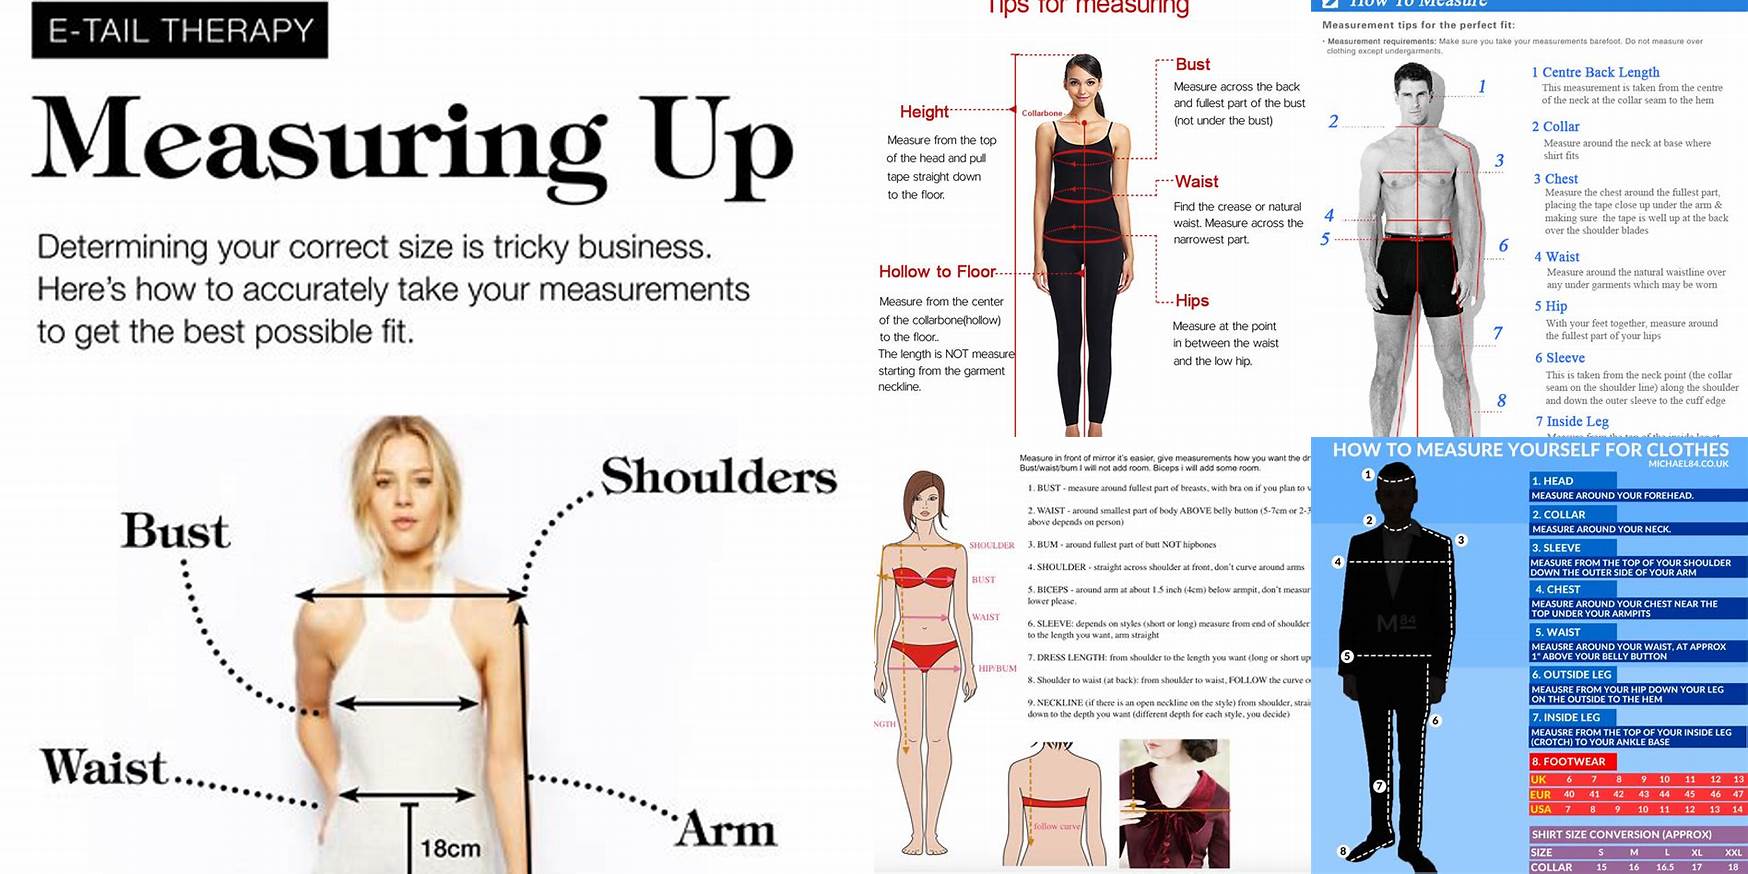 Where To Measure For Clothes